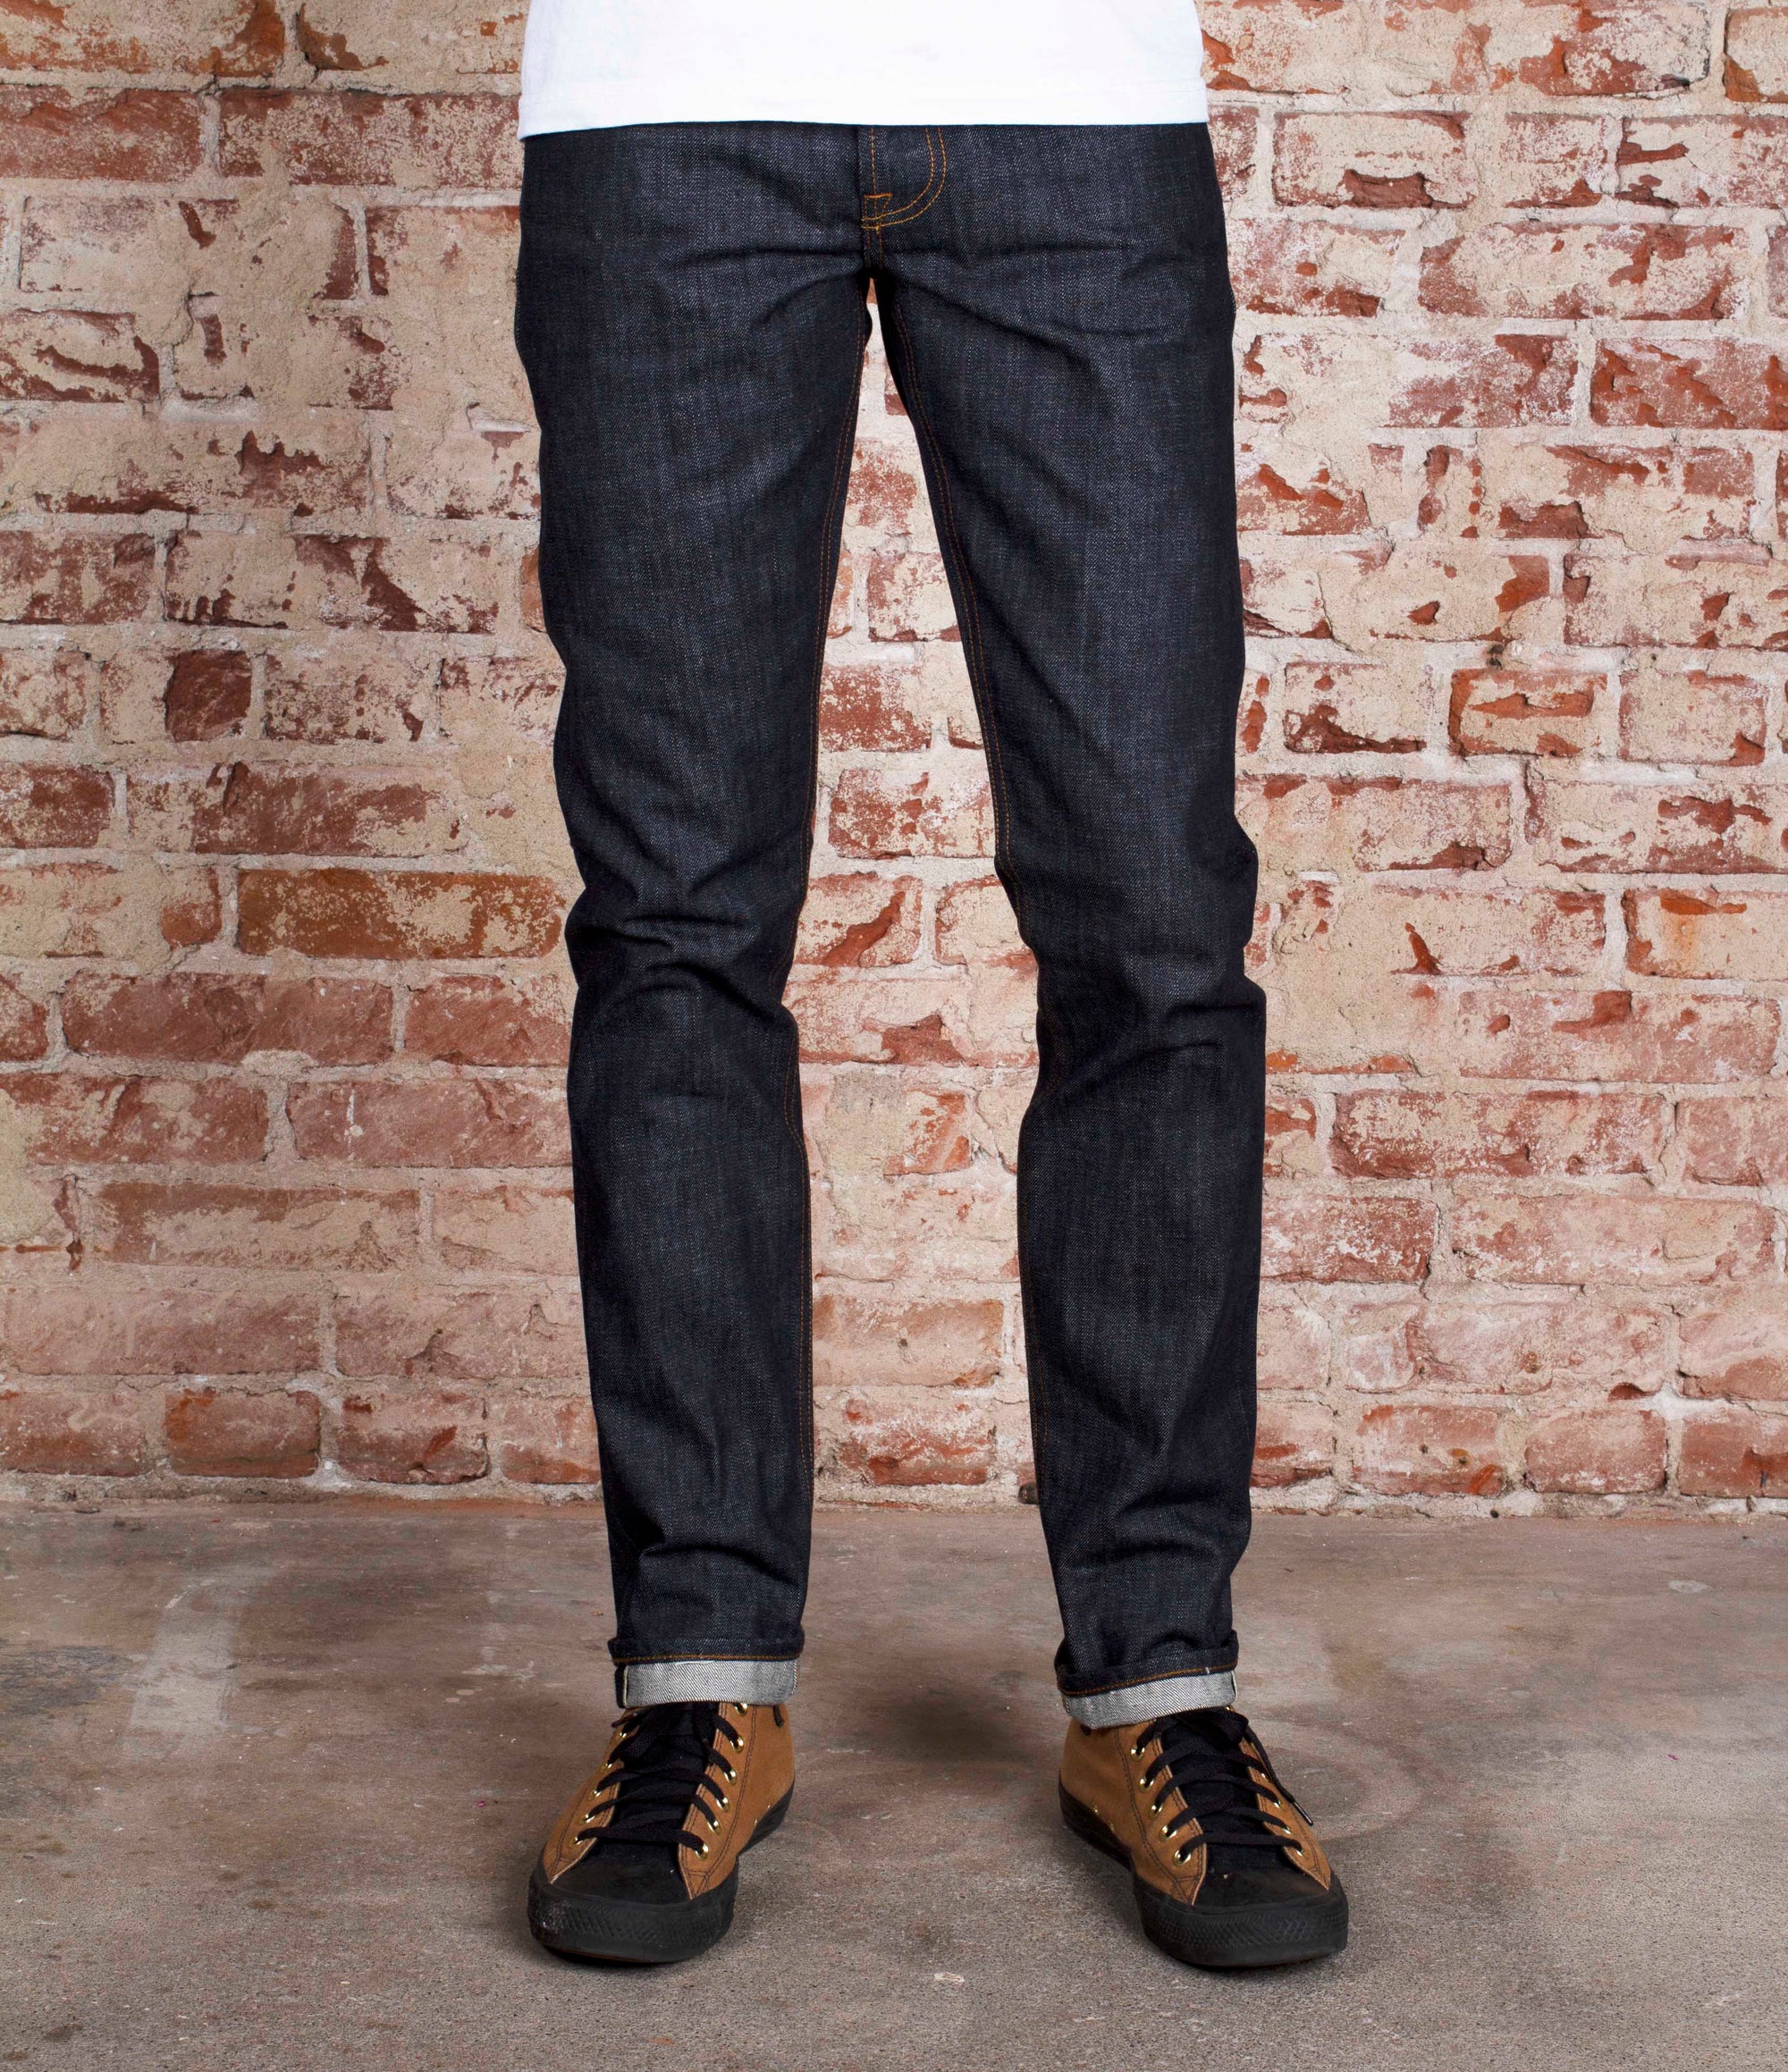 the_tailor_makes_the_man: 👖 Brave Star Slim Straight 15oz Cone